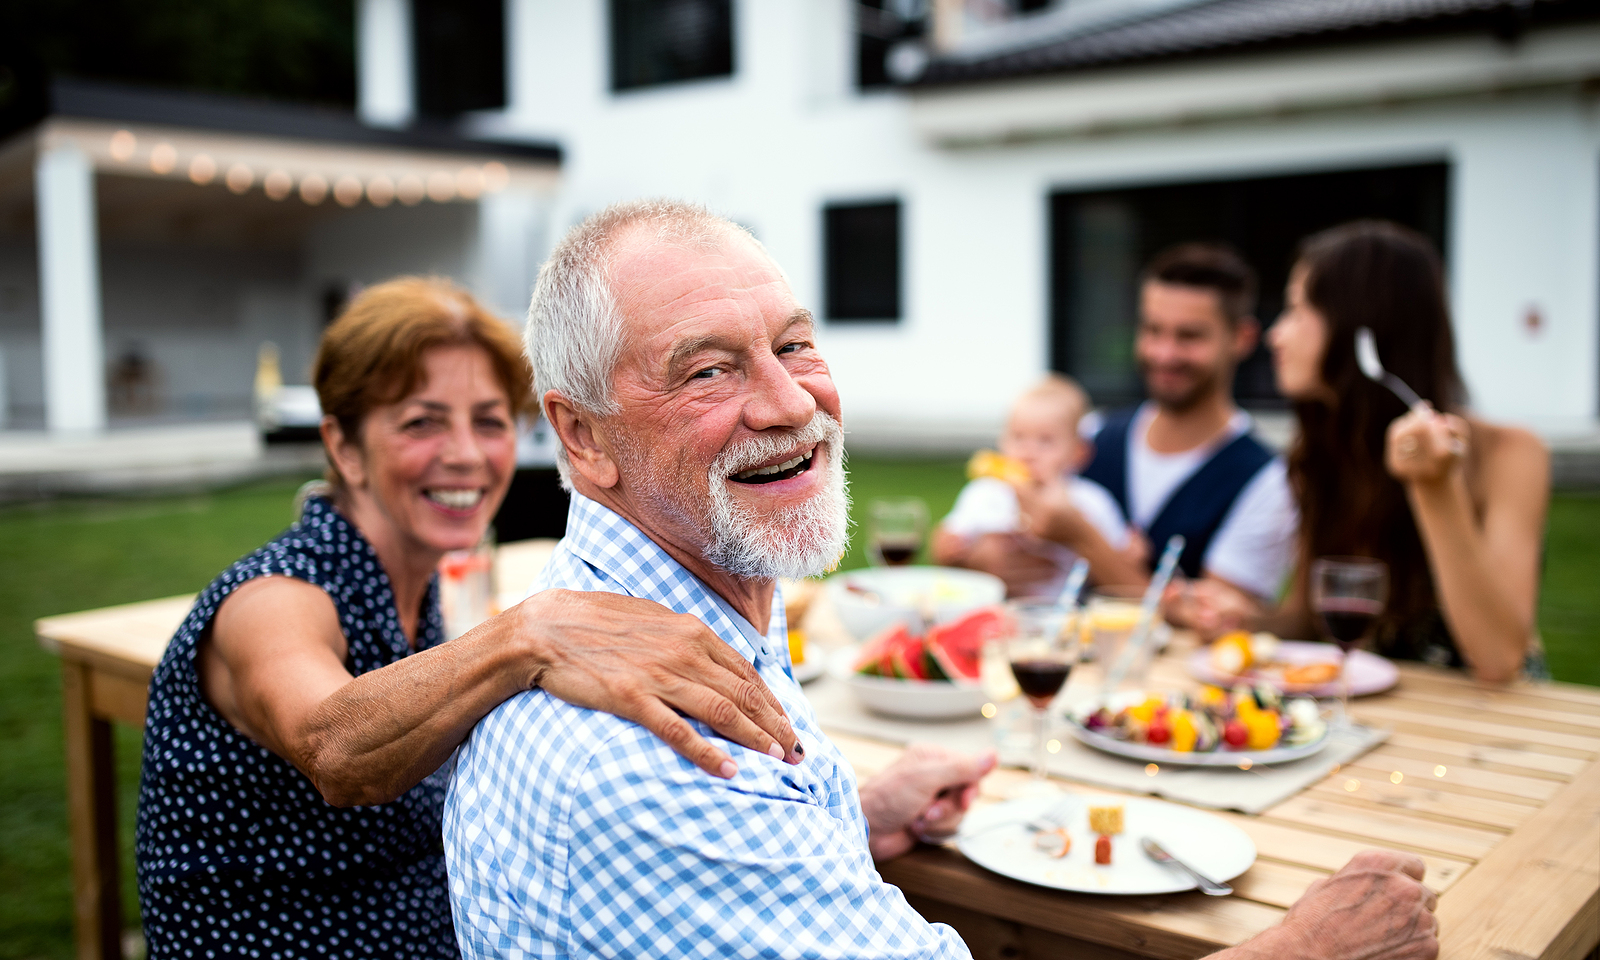 The Best 4 Things Senior Men Can Do To Stay Healthy